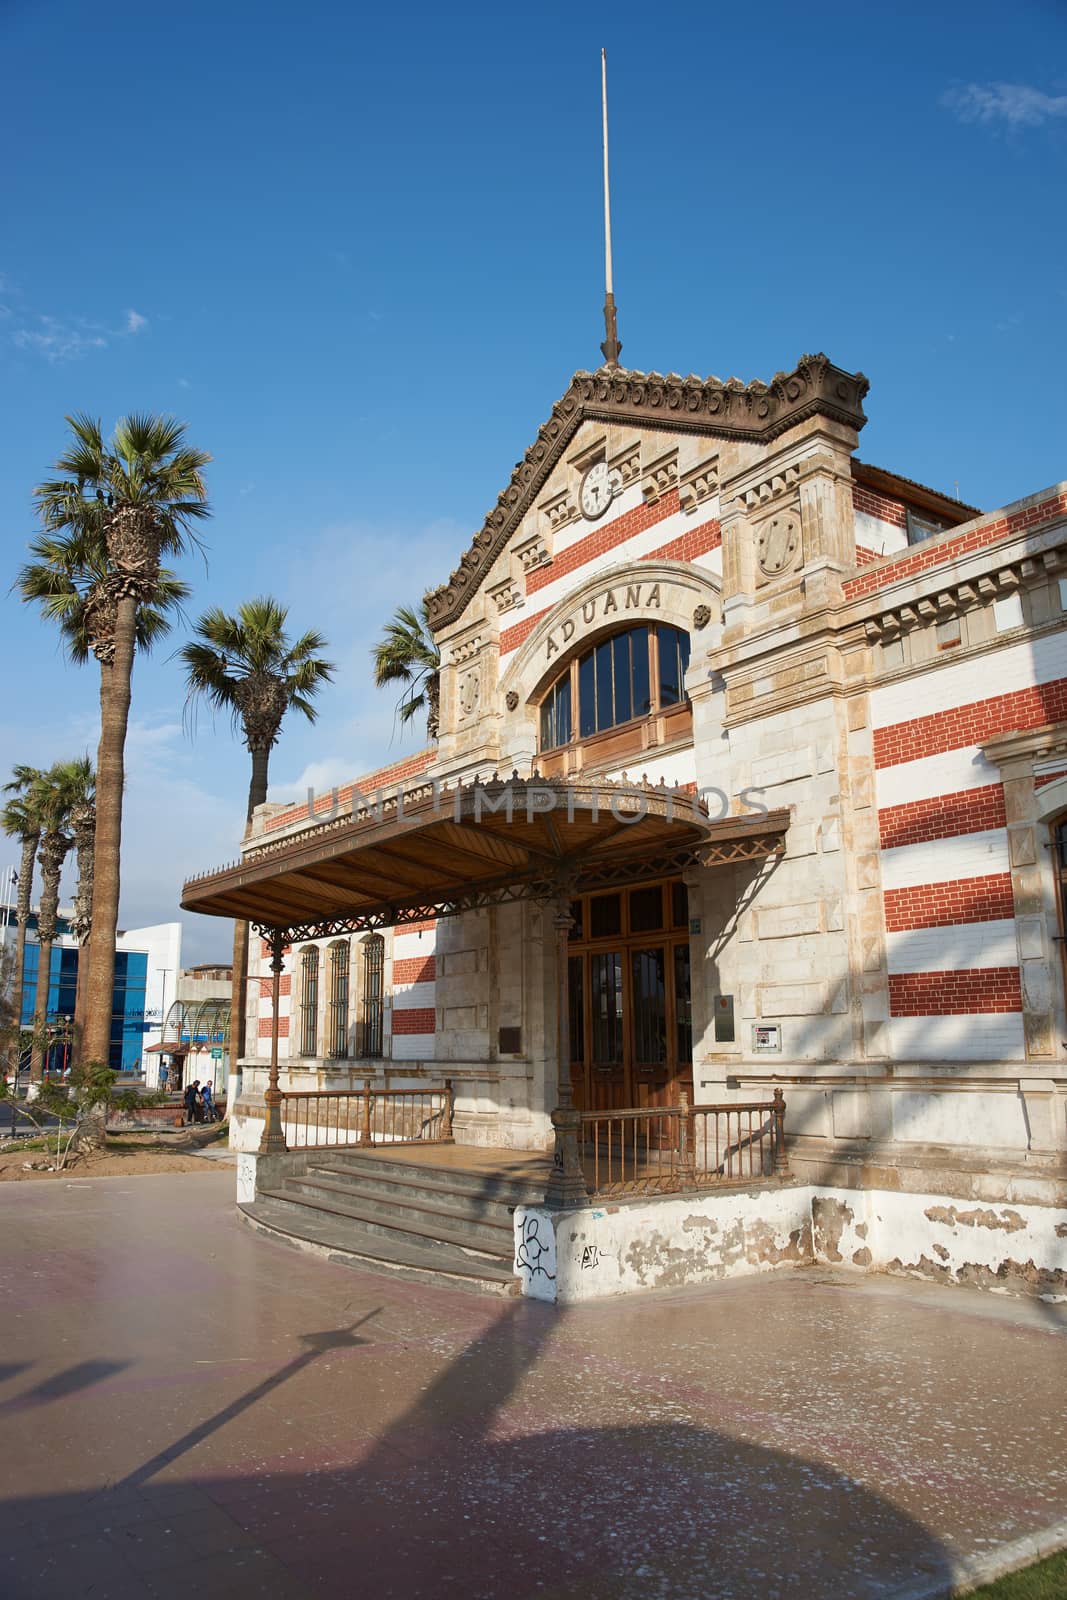 Historic customs office in the city of Arica in northern Chile.